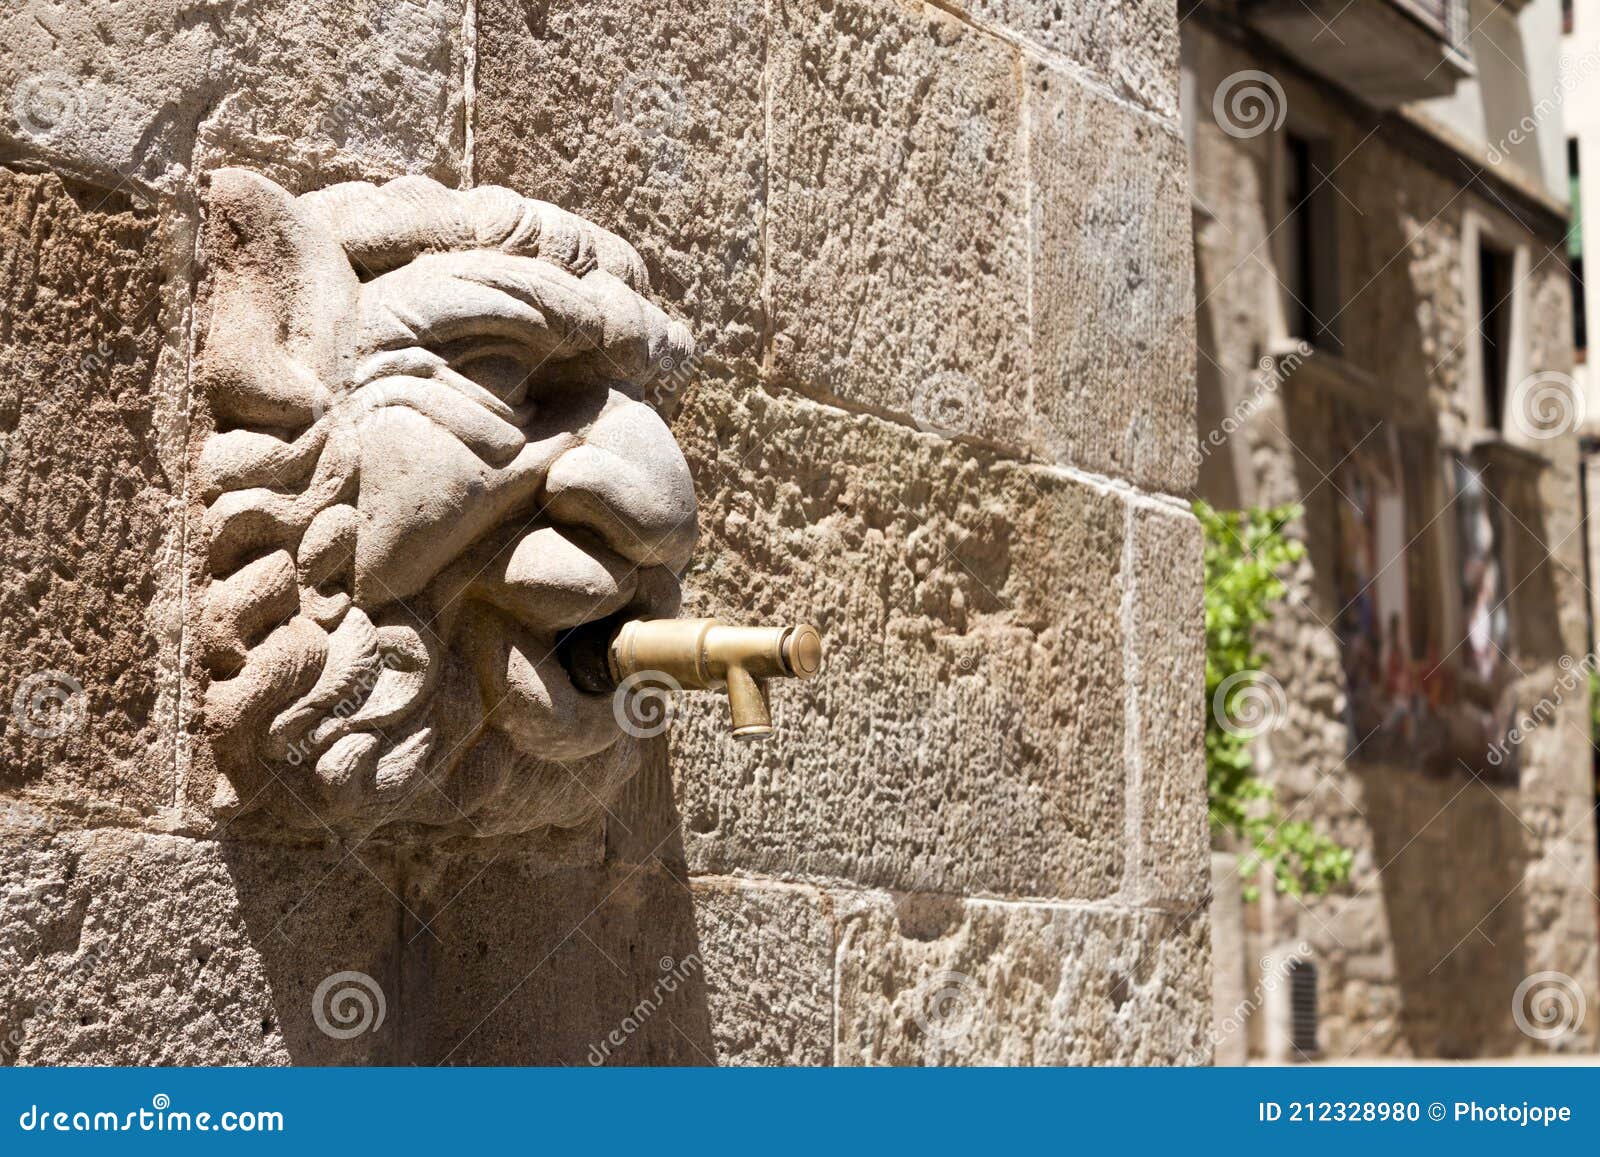 gothic stone head of fontain of the church in solsona, lleida,catalonia, spain